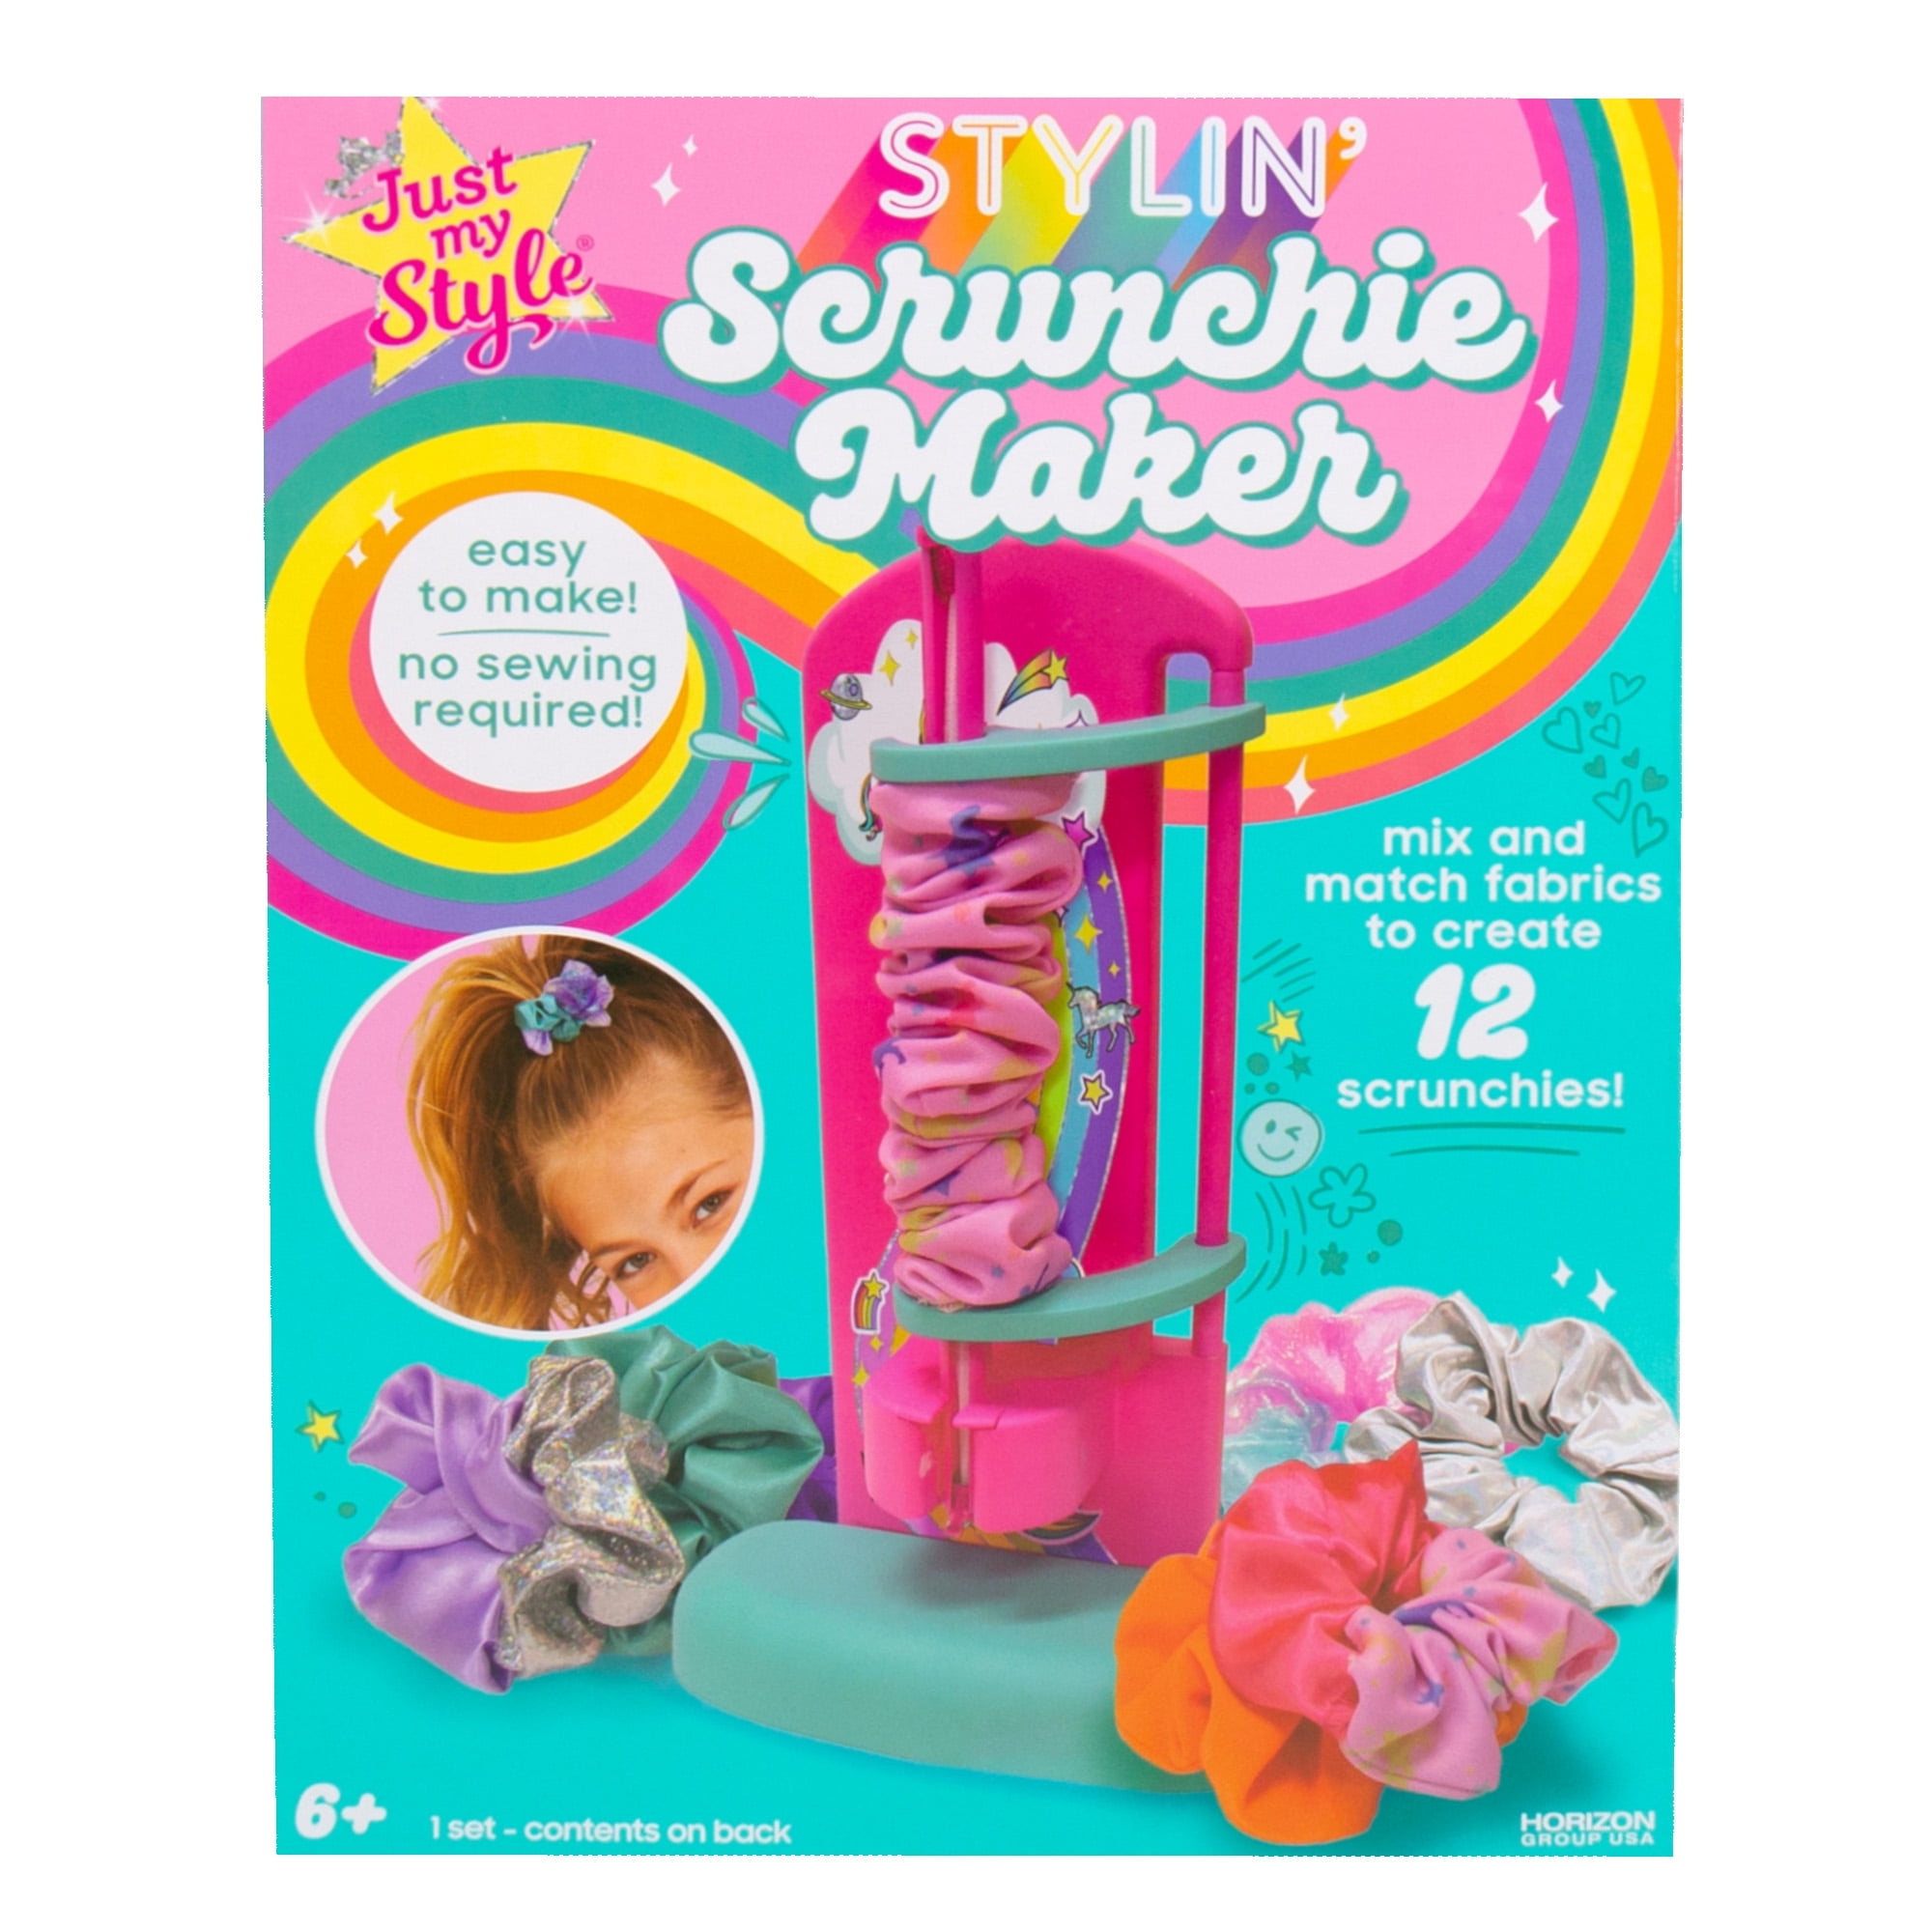 Scrunchie Beginner Sewing Kit - Blossom - Sewing Project Kit for Kids